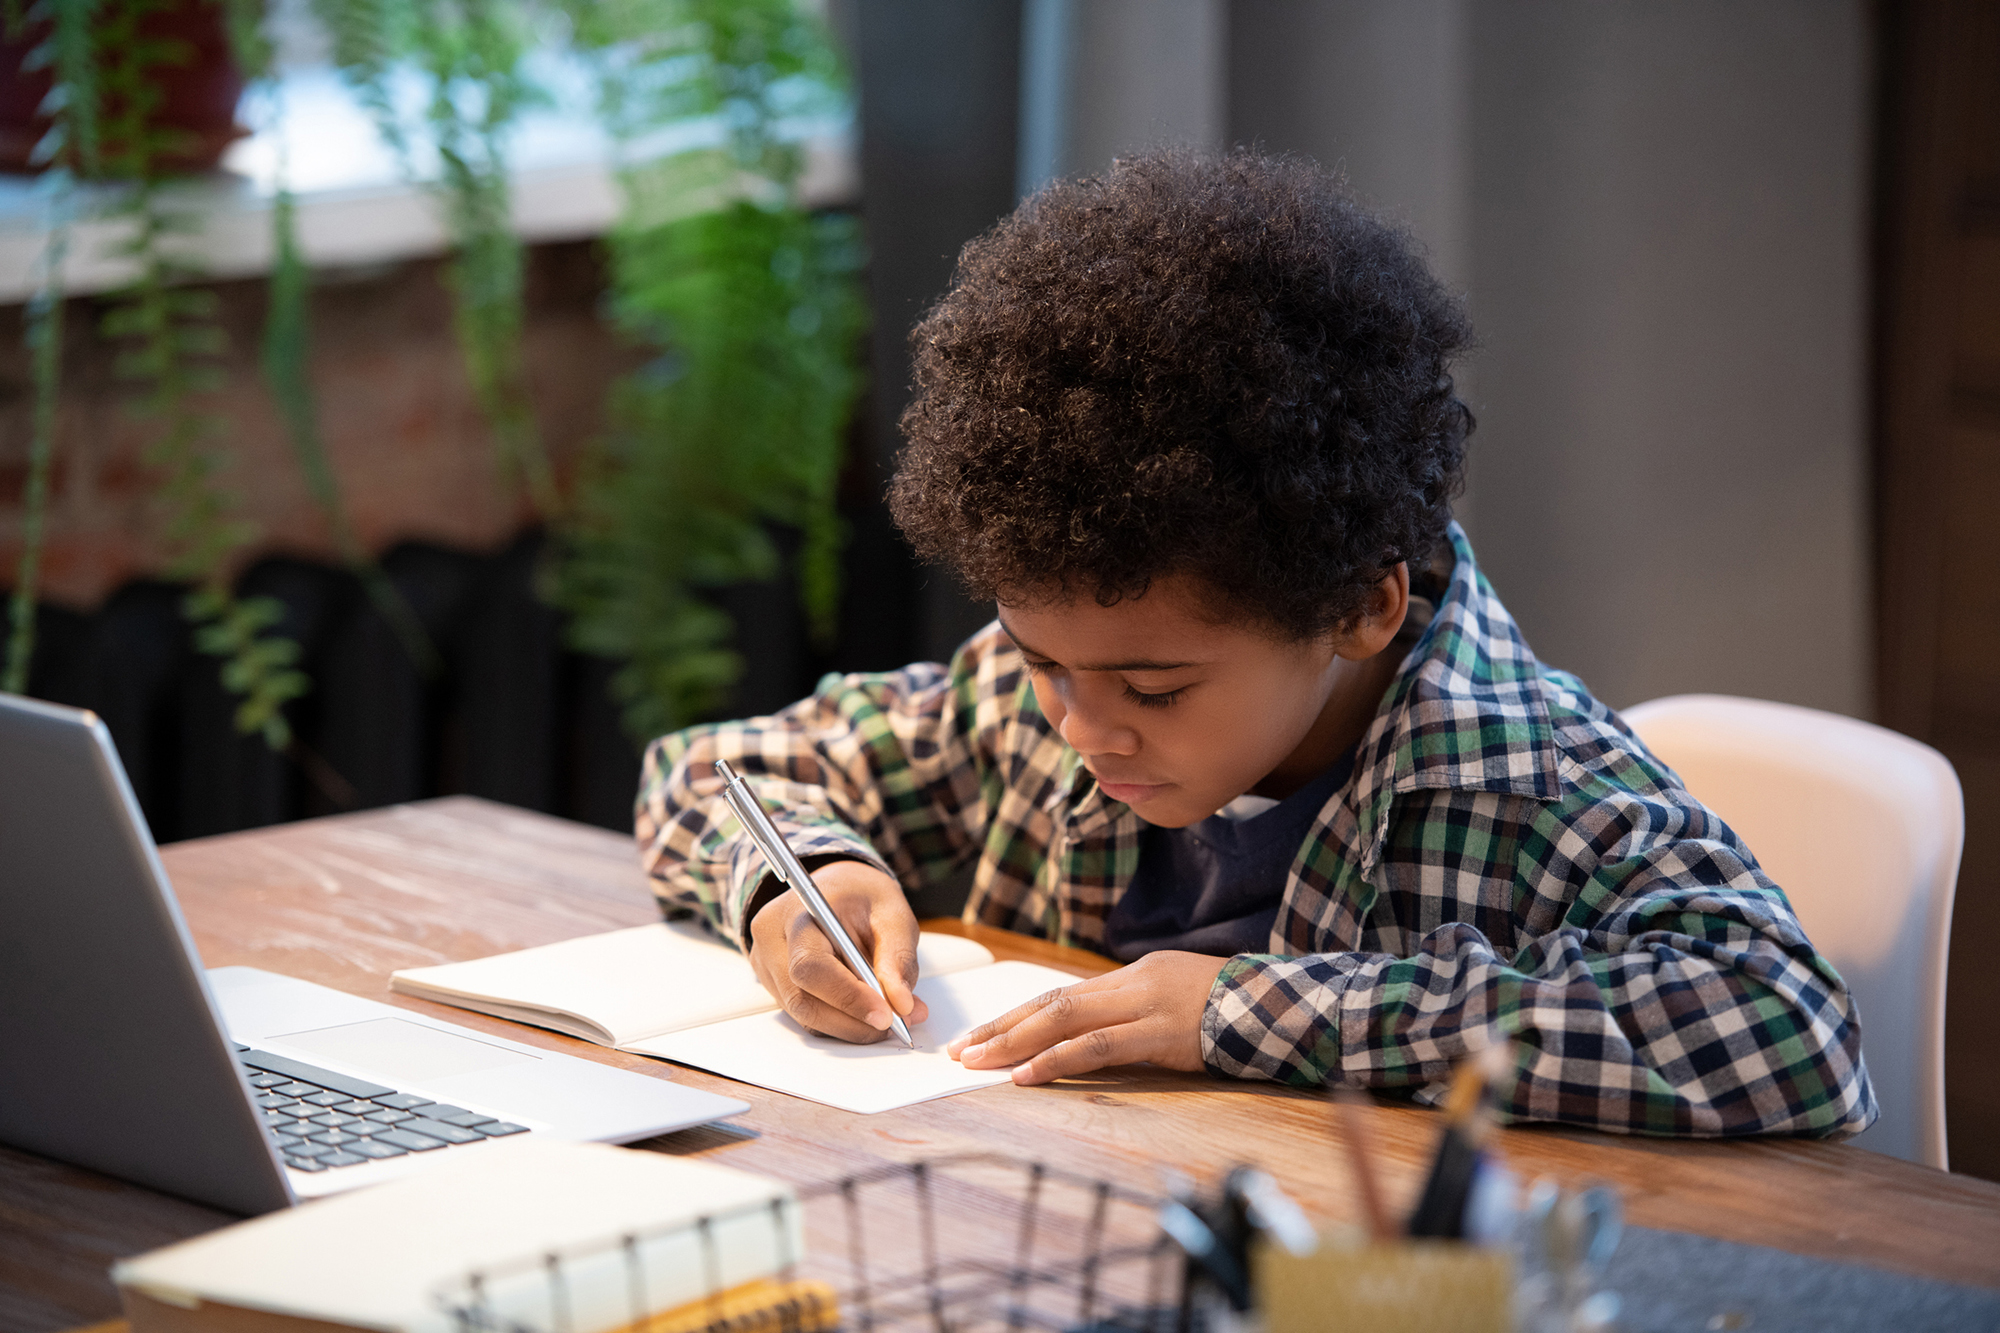 Young child writing in a notebook at a table with a laptop.